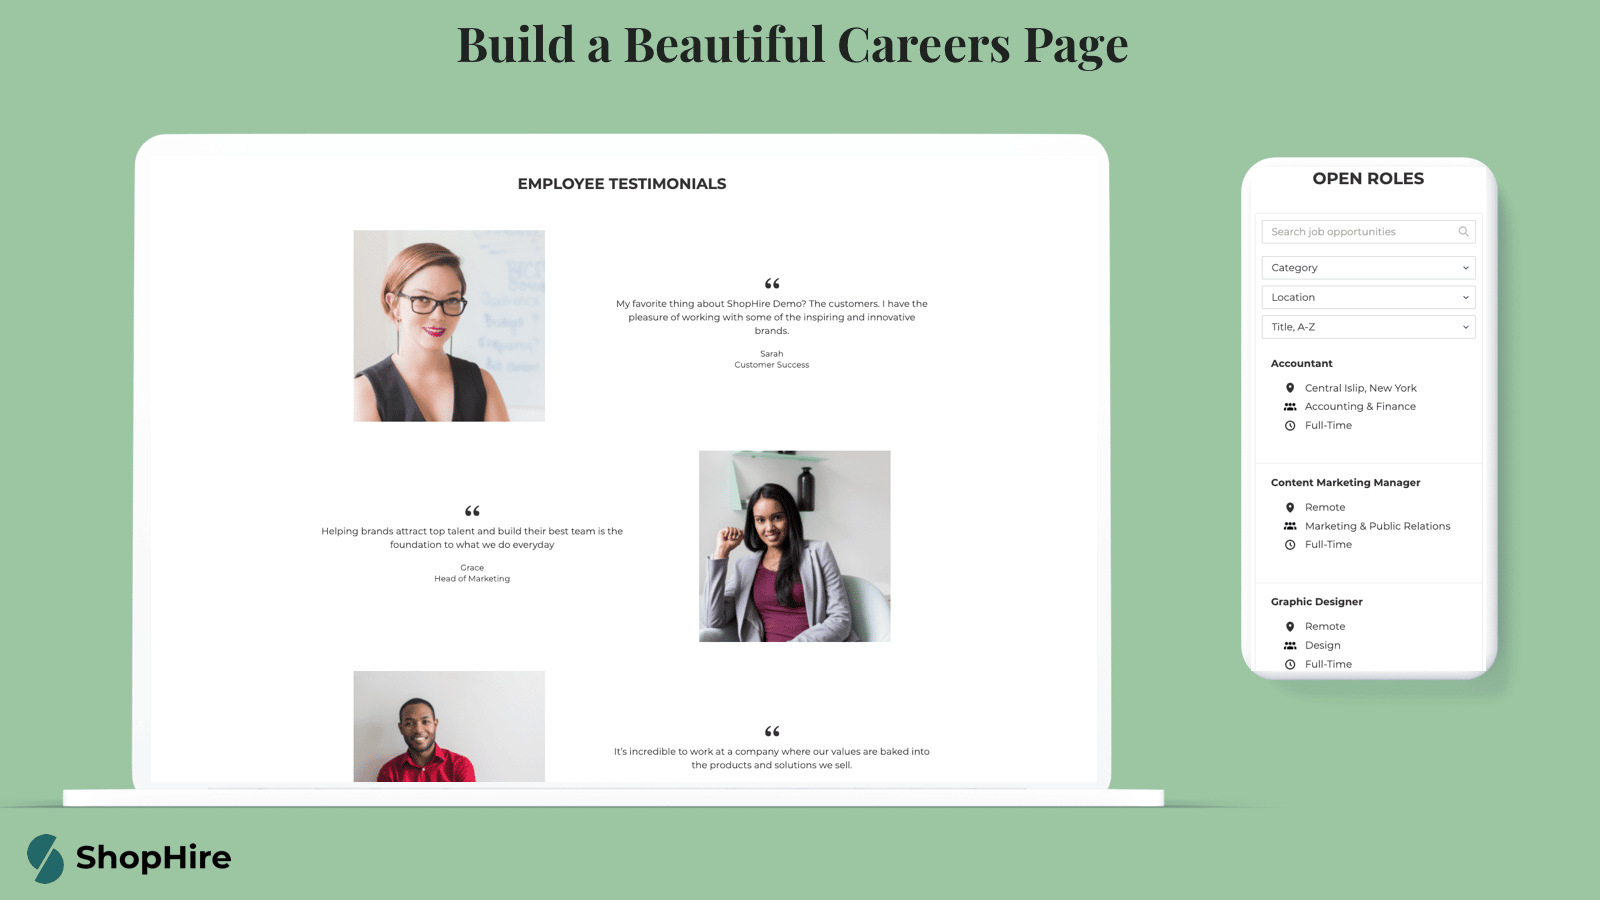 ShopHire Careers Page Builder